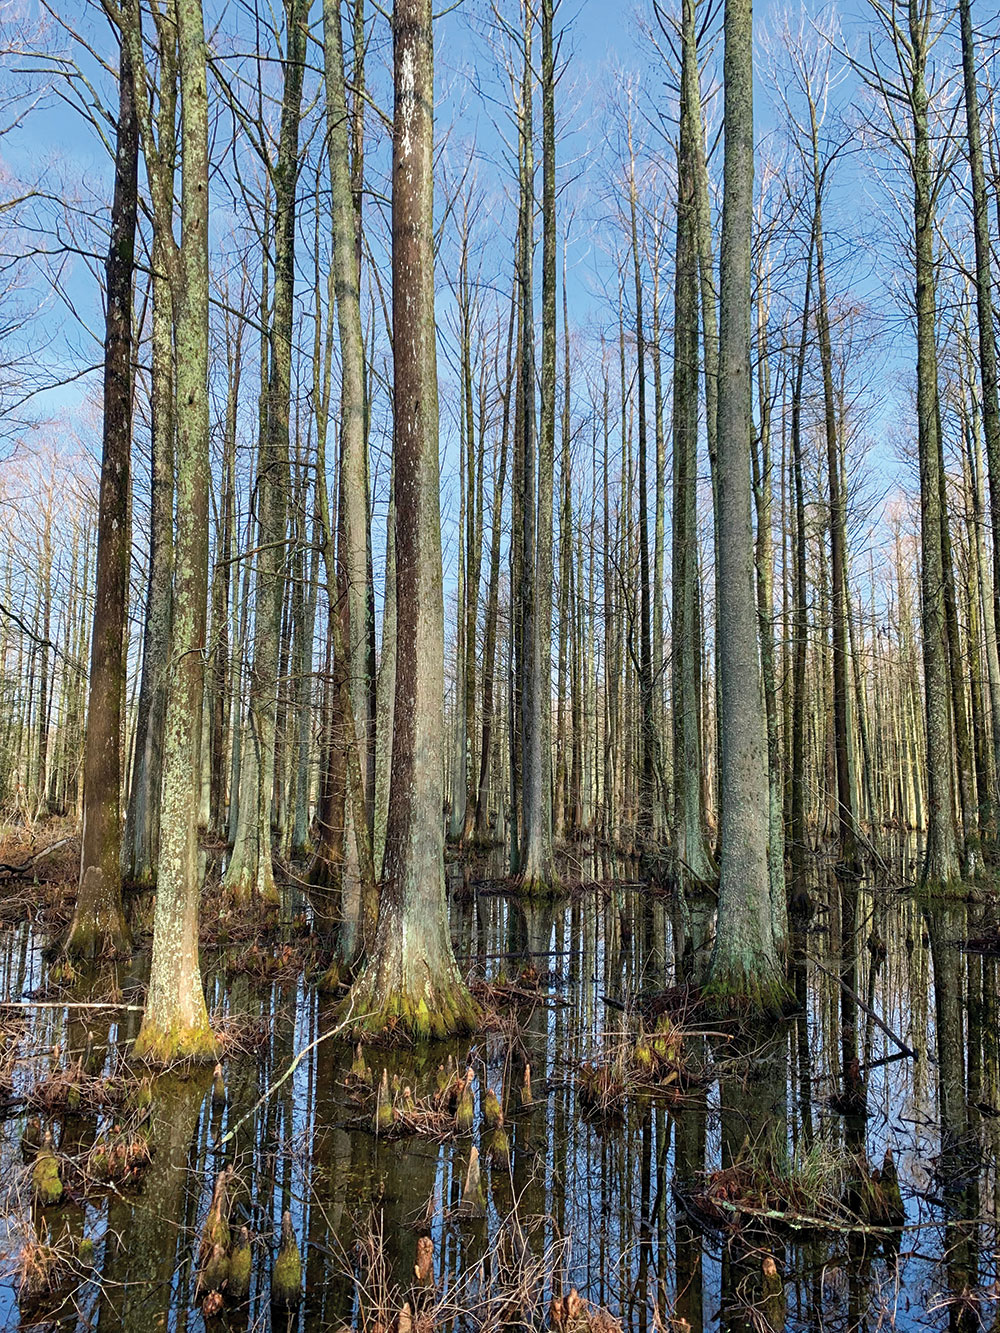 The wild and dangerous environment of The Great Dismal Swamp became a haven for runaways seeking freedom.